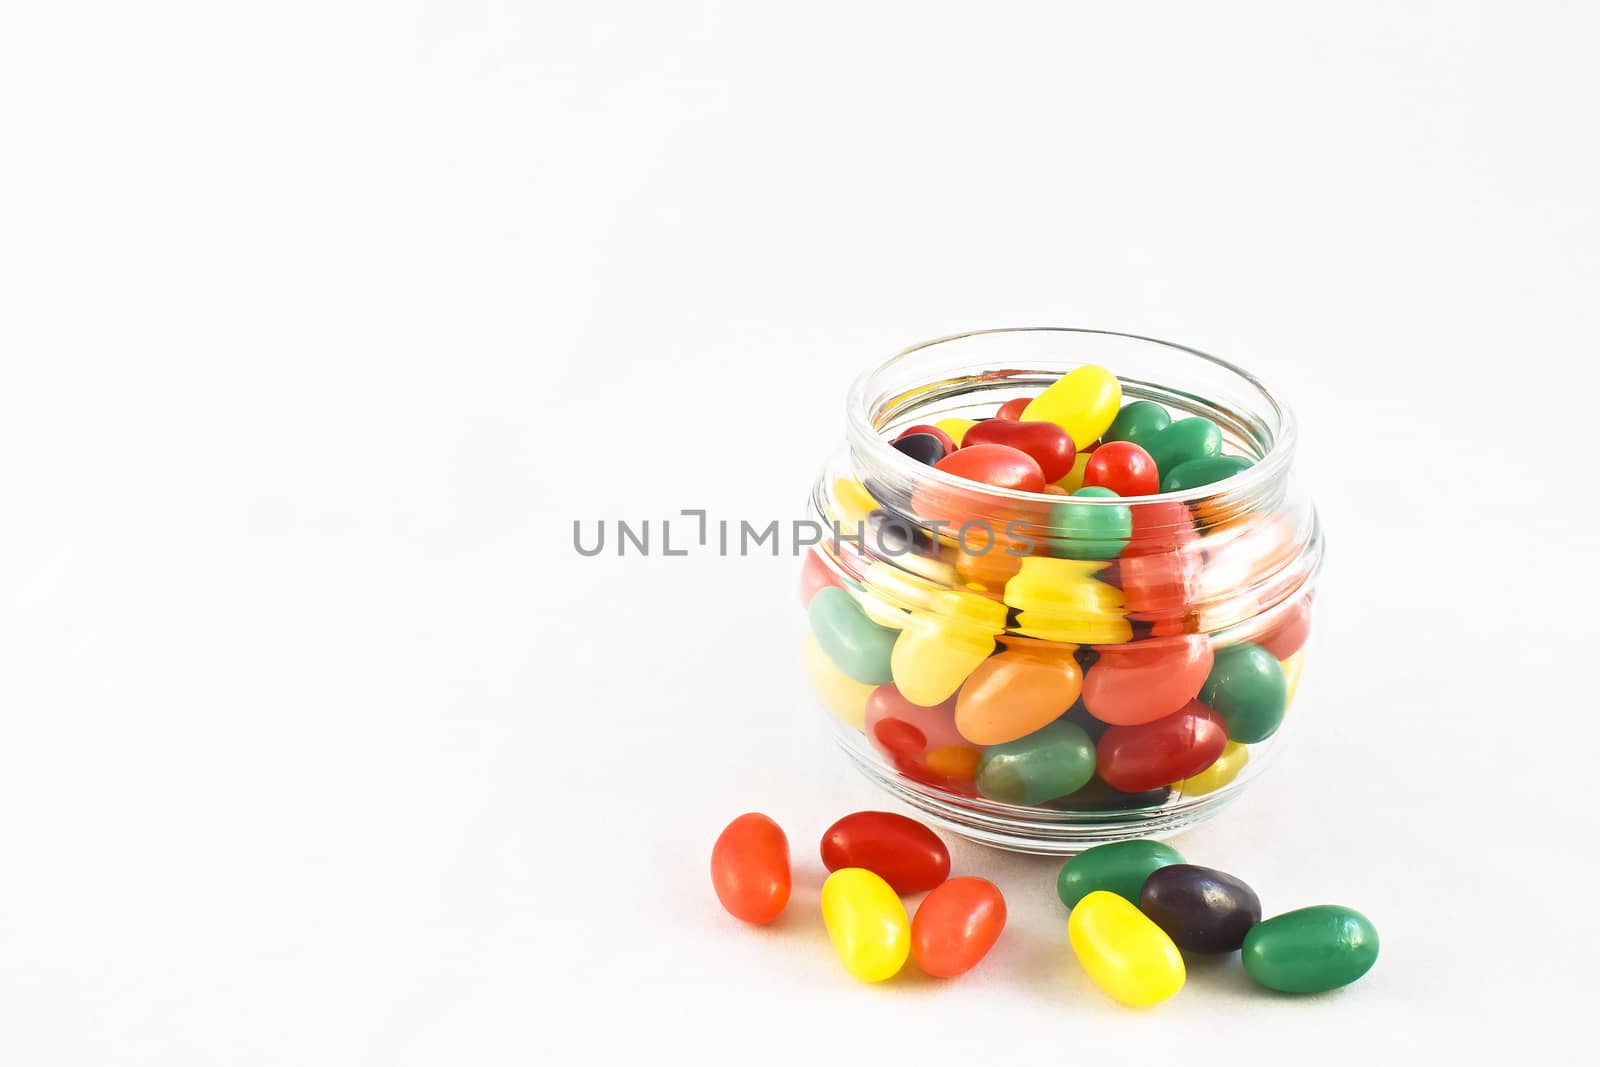 Glass jar full of multi-colored jelly beans. Several and strewn about on the white surface.